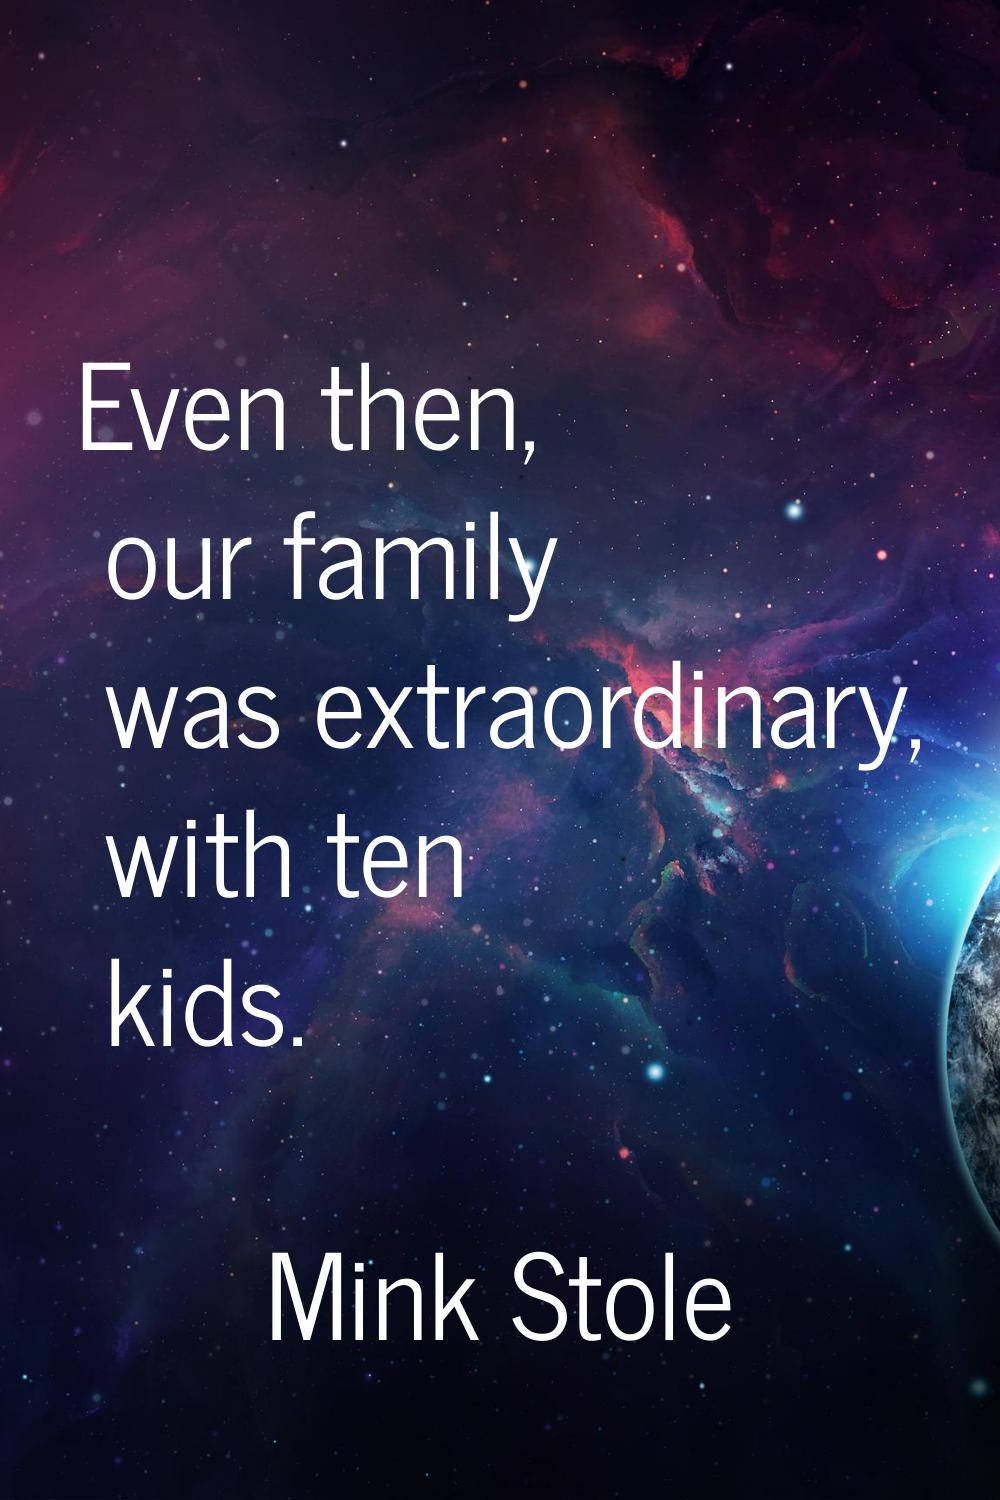 Even then, our family was extraordinary, with ten kids.